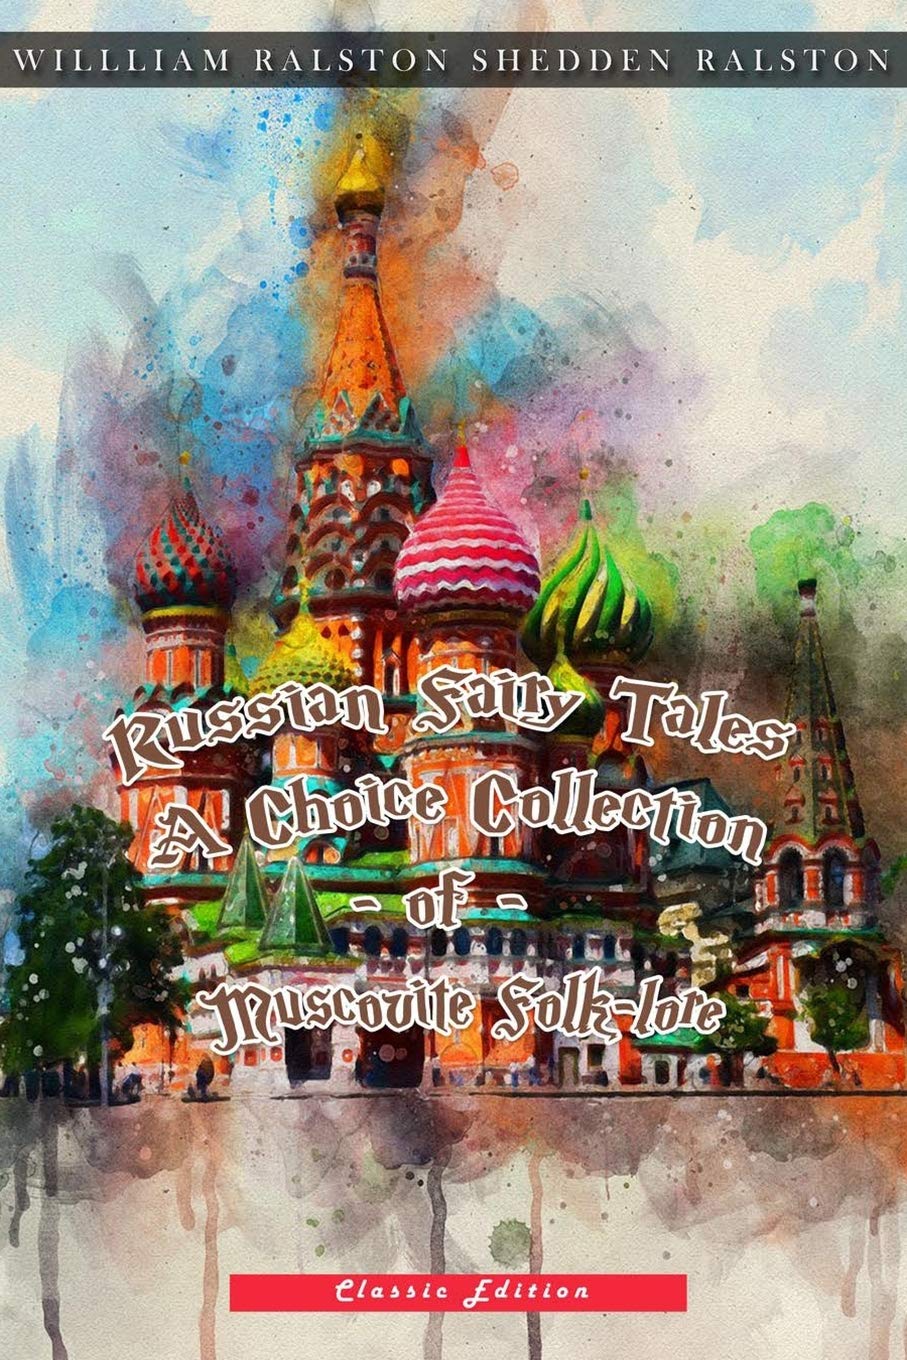 Russian Fairy Tales- A Choice Collection of Muscovite Folk-lore- Annotated  by  William Ralston Shedden Ralston